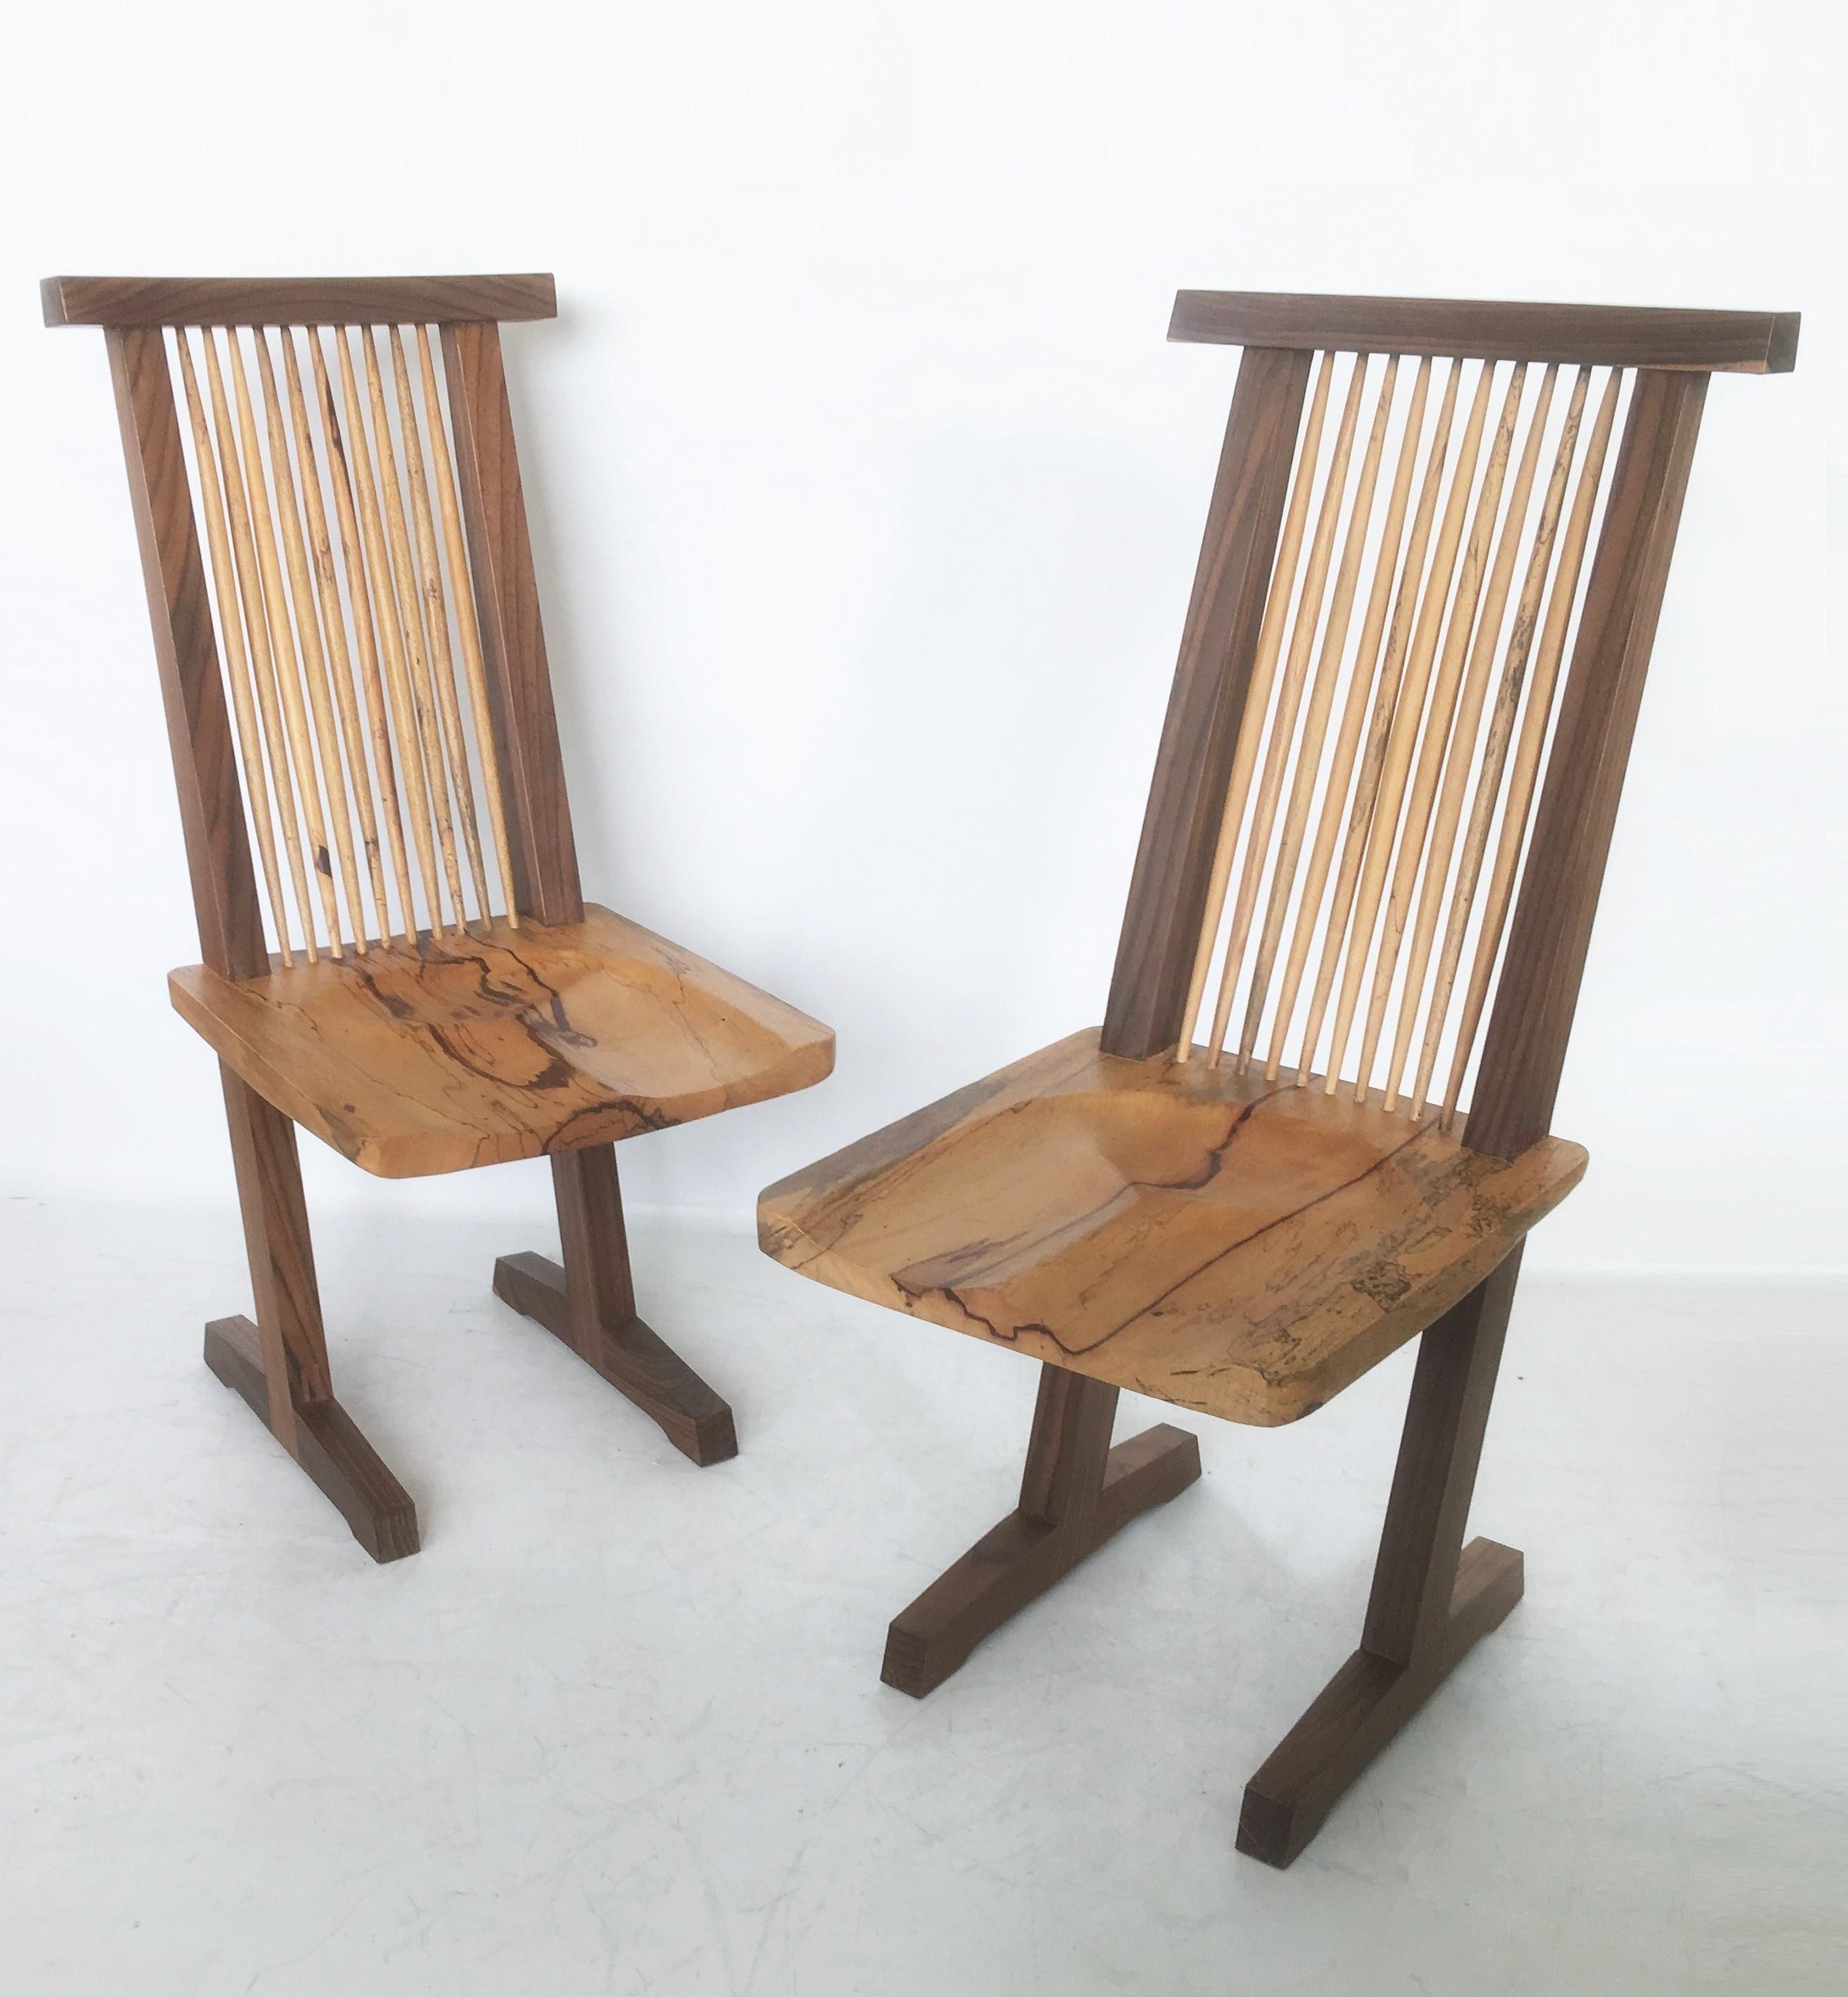 Hand-Crafted Vintage Pair of Conoid Chairs, after George Nakashima For Sale